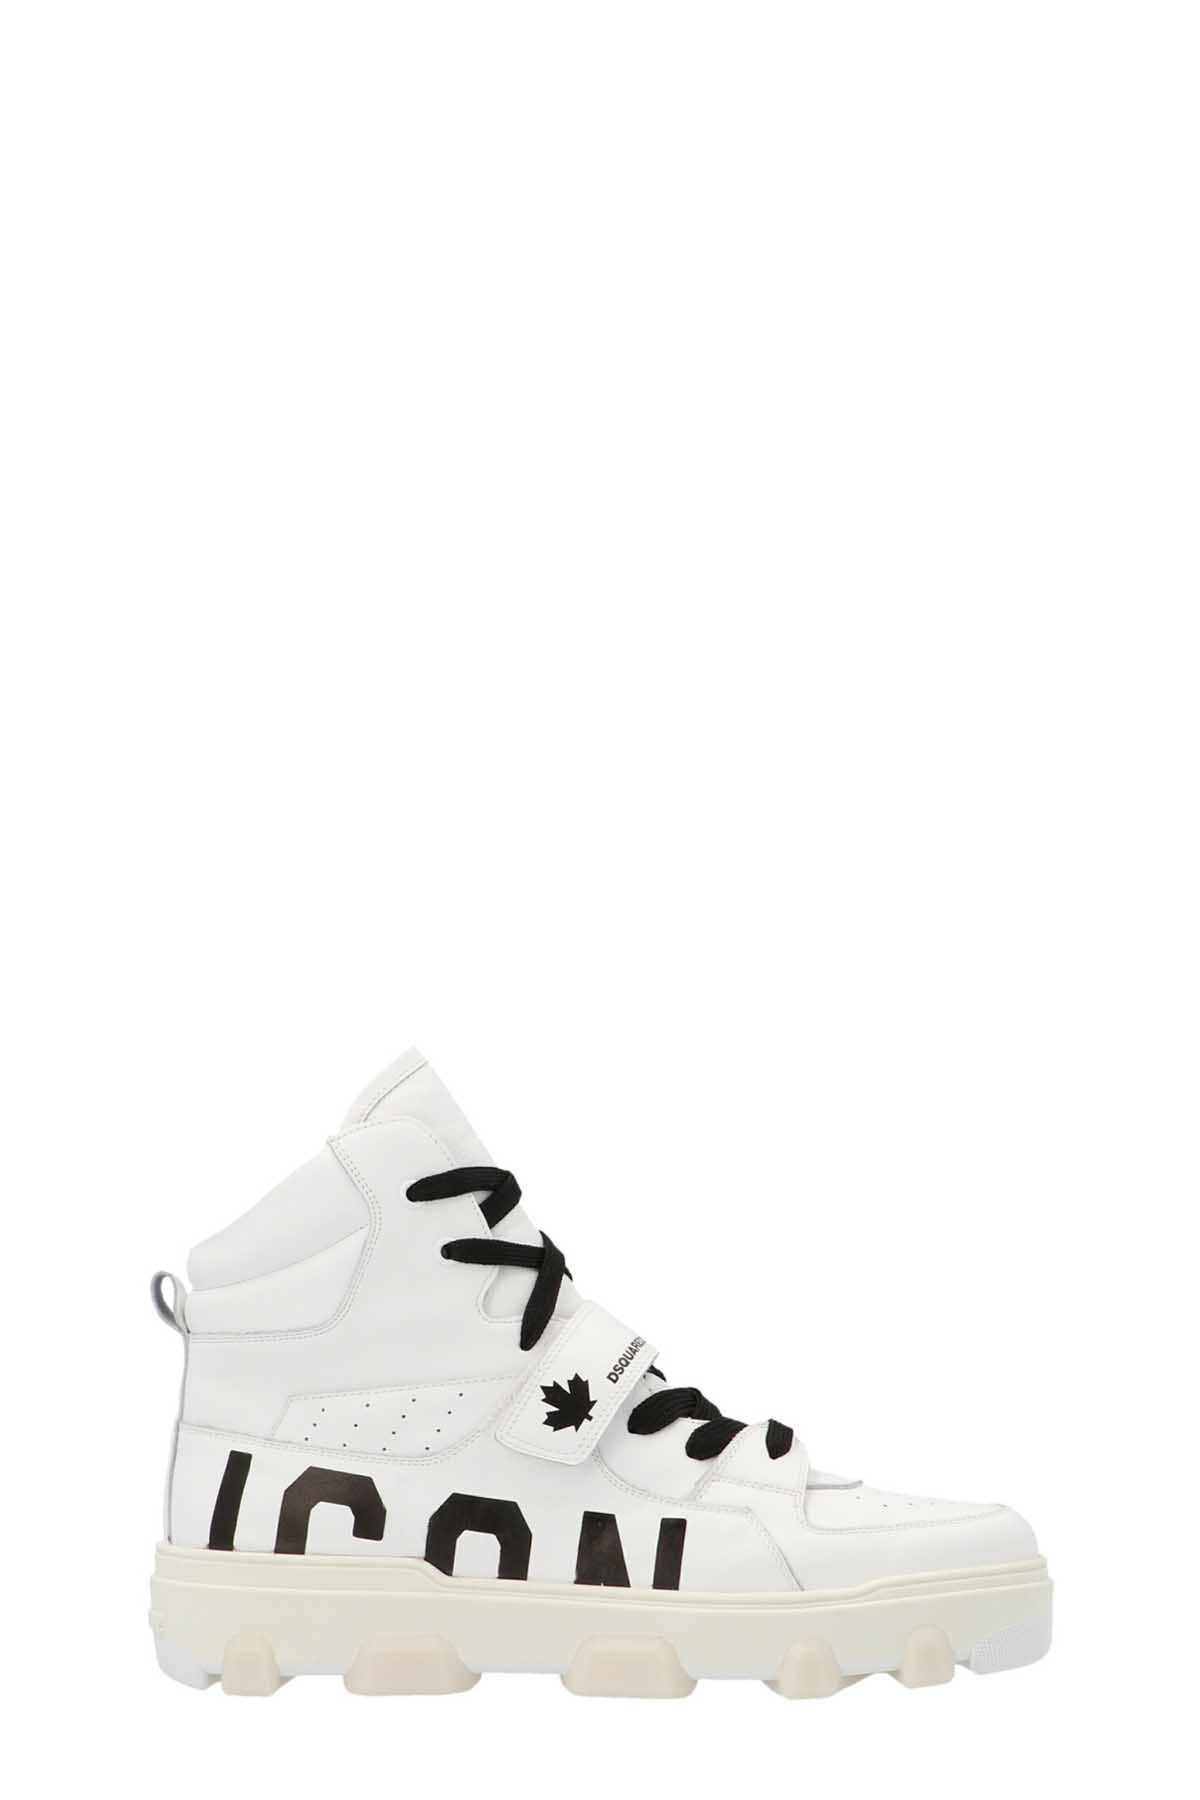 DSQUARED2 'Icon Basket’ Sneakers